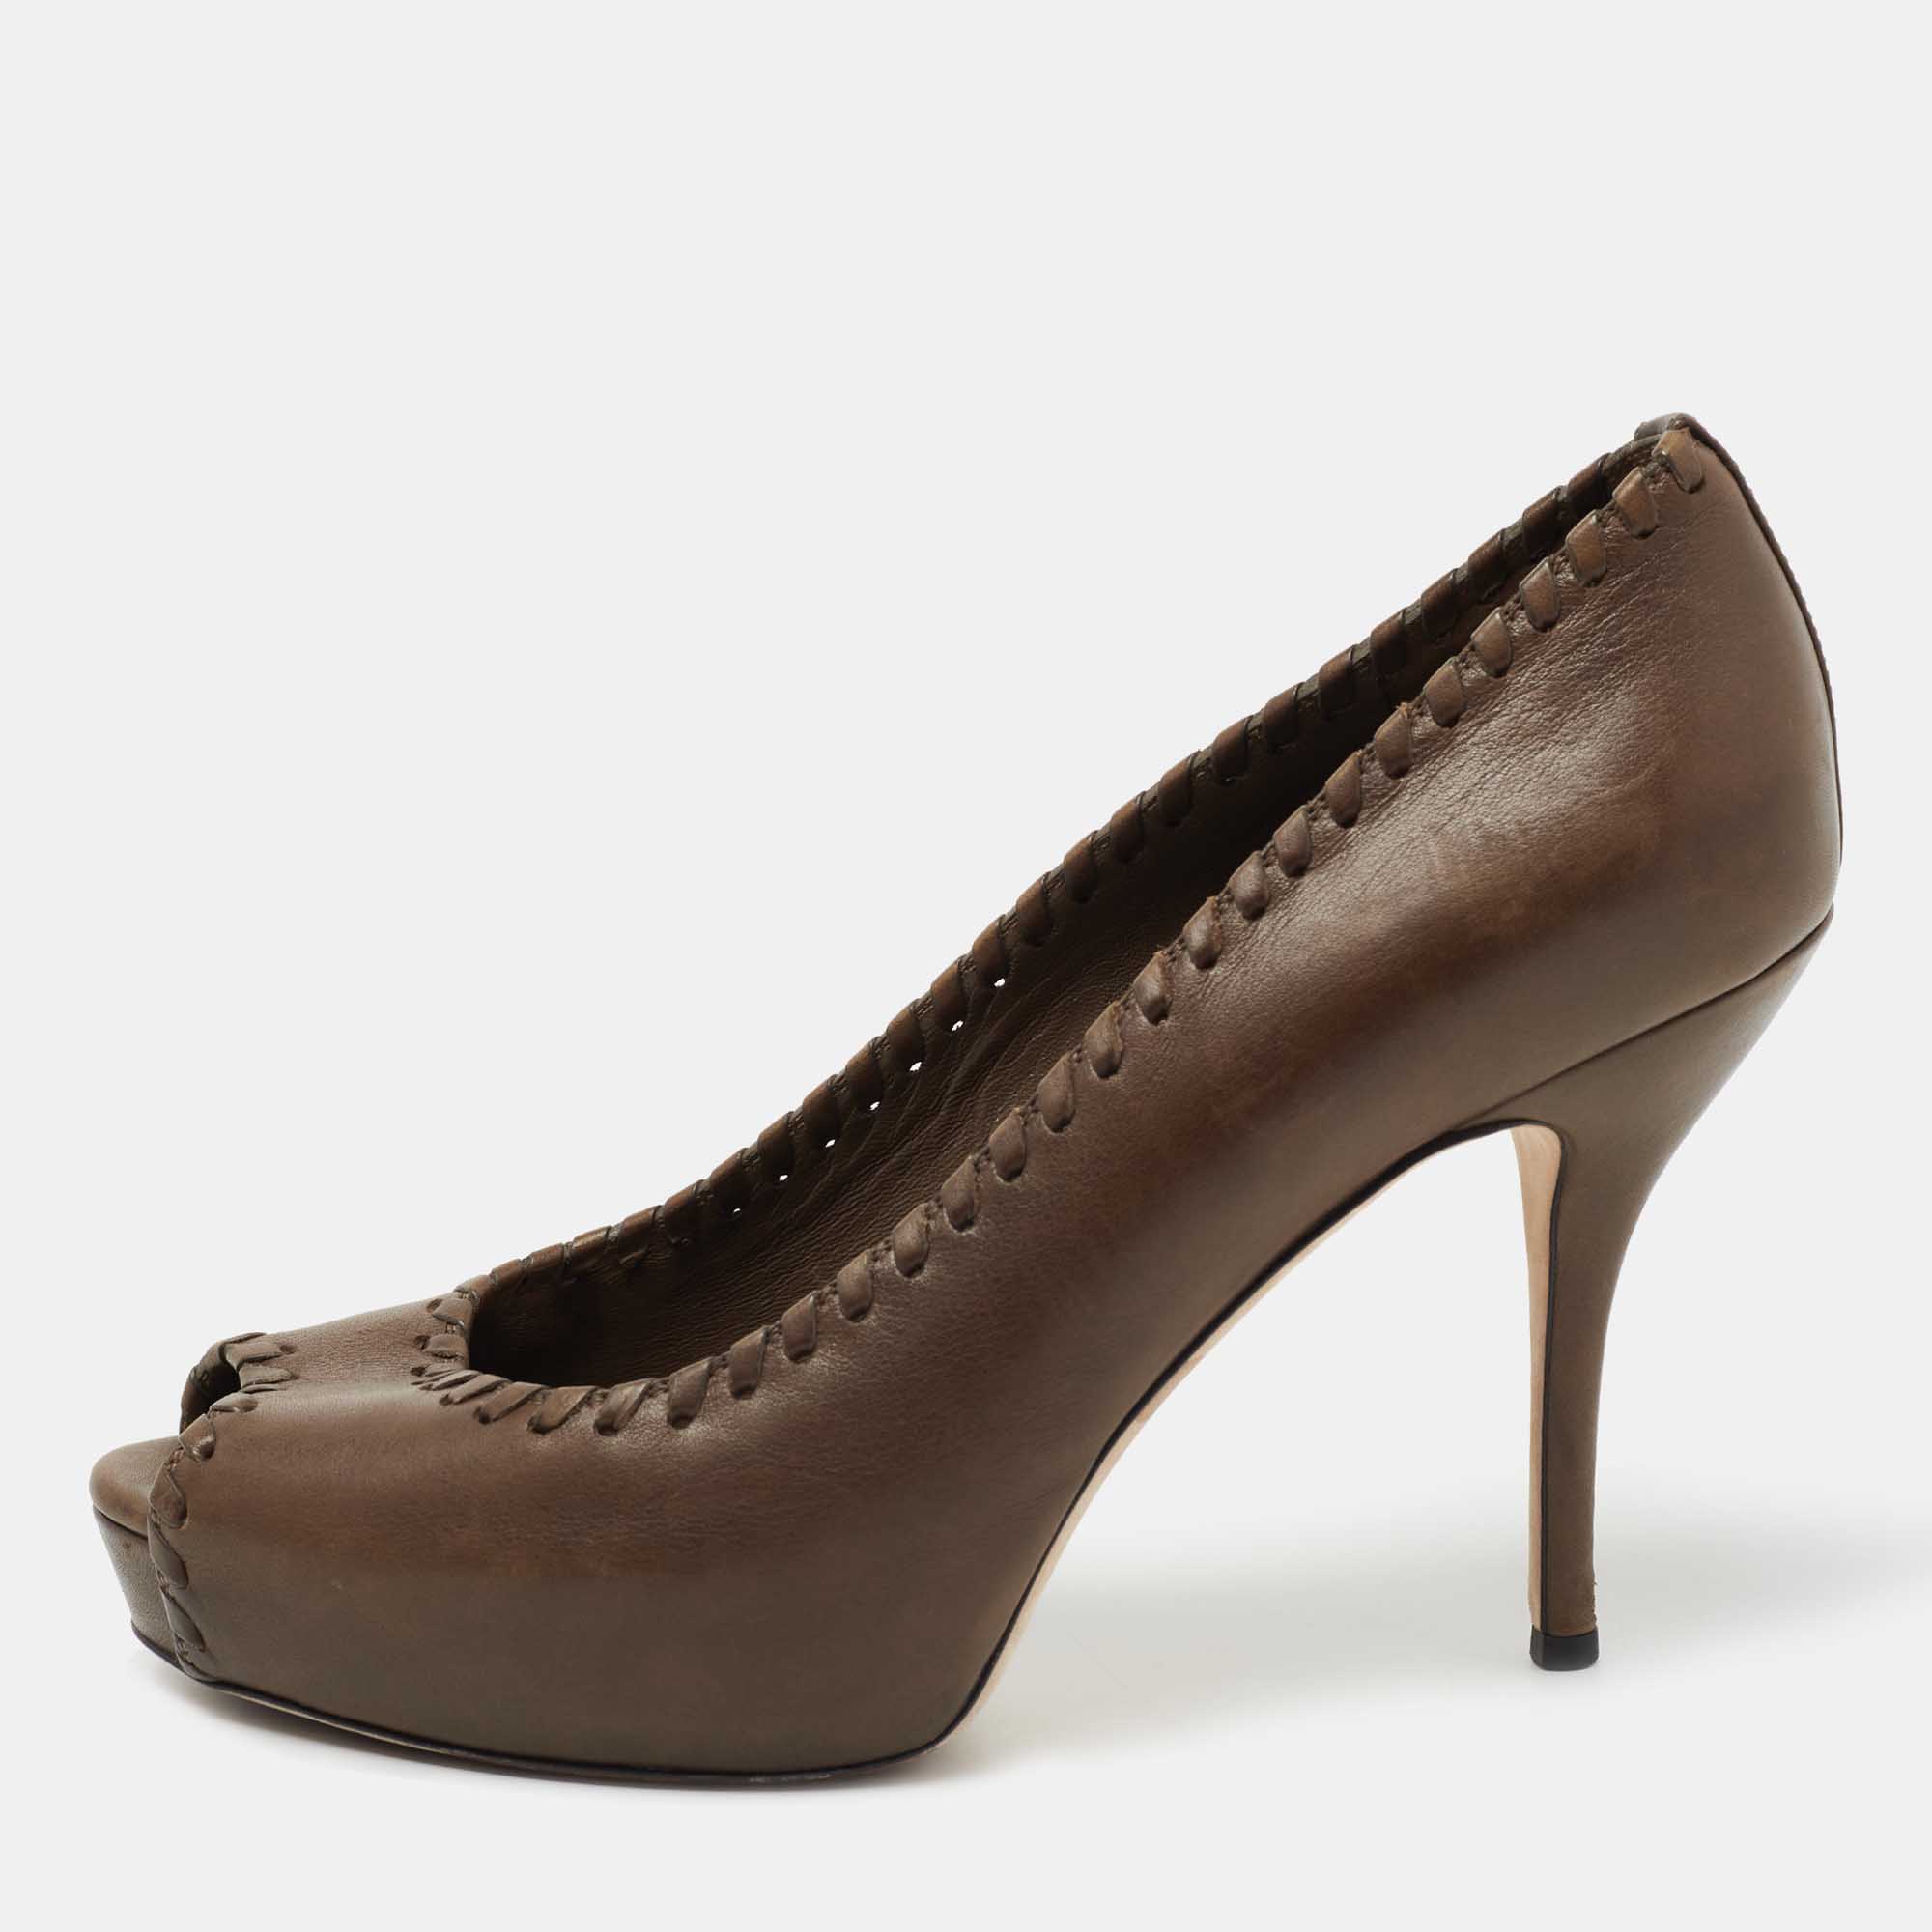 This classic and timeless pair of pumps from Gucci is essential in every woman's collection. Constructed in brown leather these peep toe pumps feature 10.5 cm heels to lift you in an elegant manner.